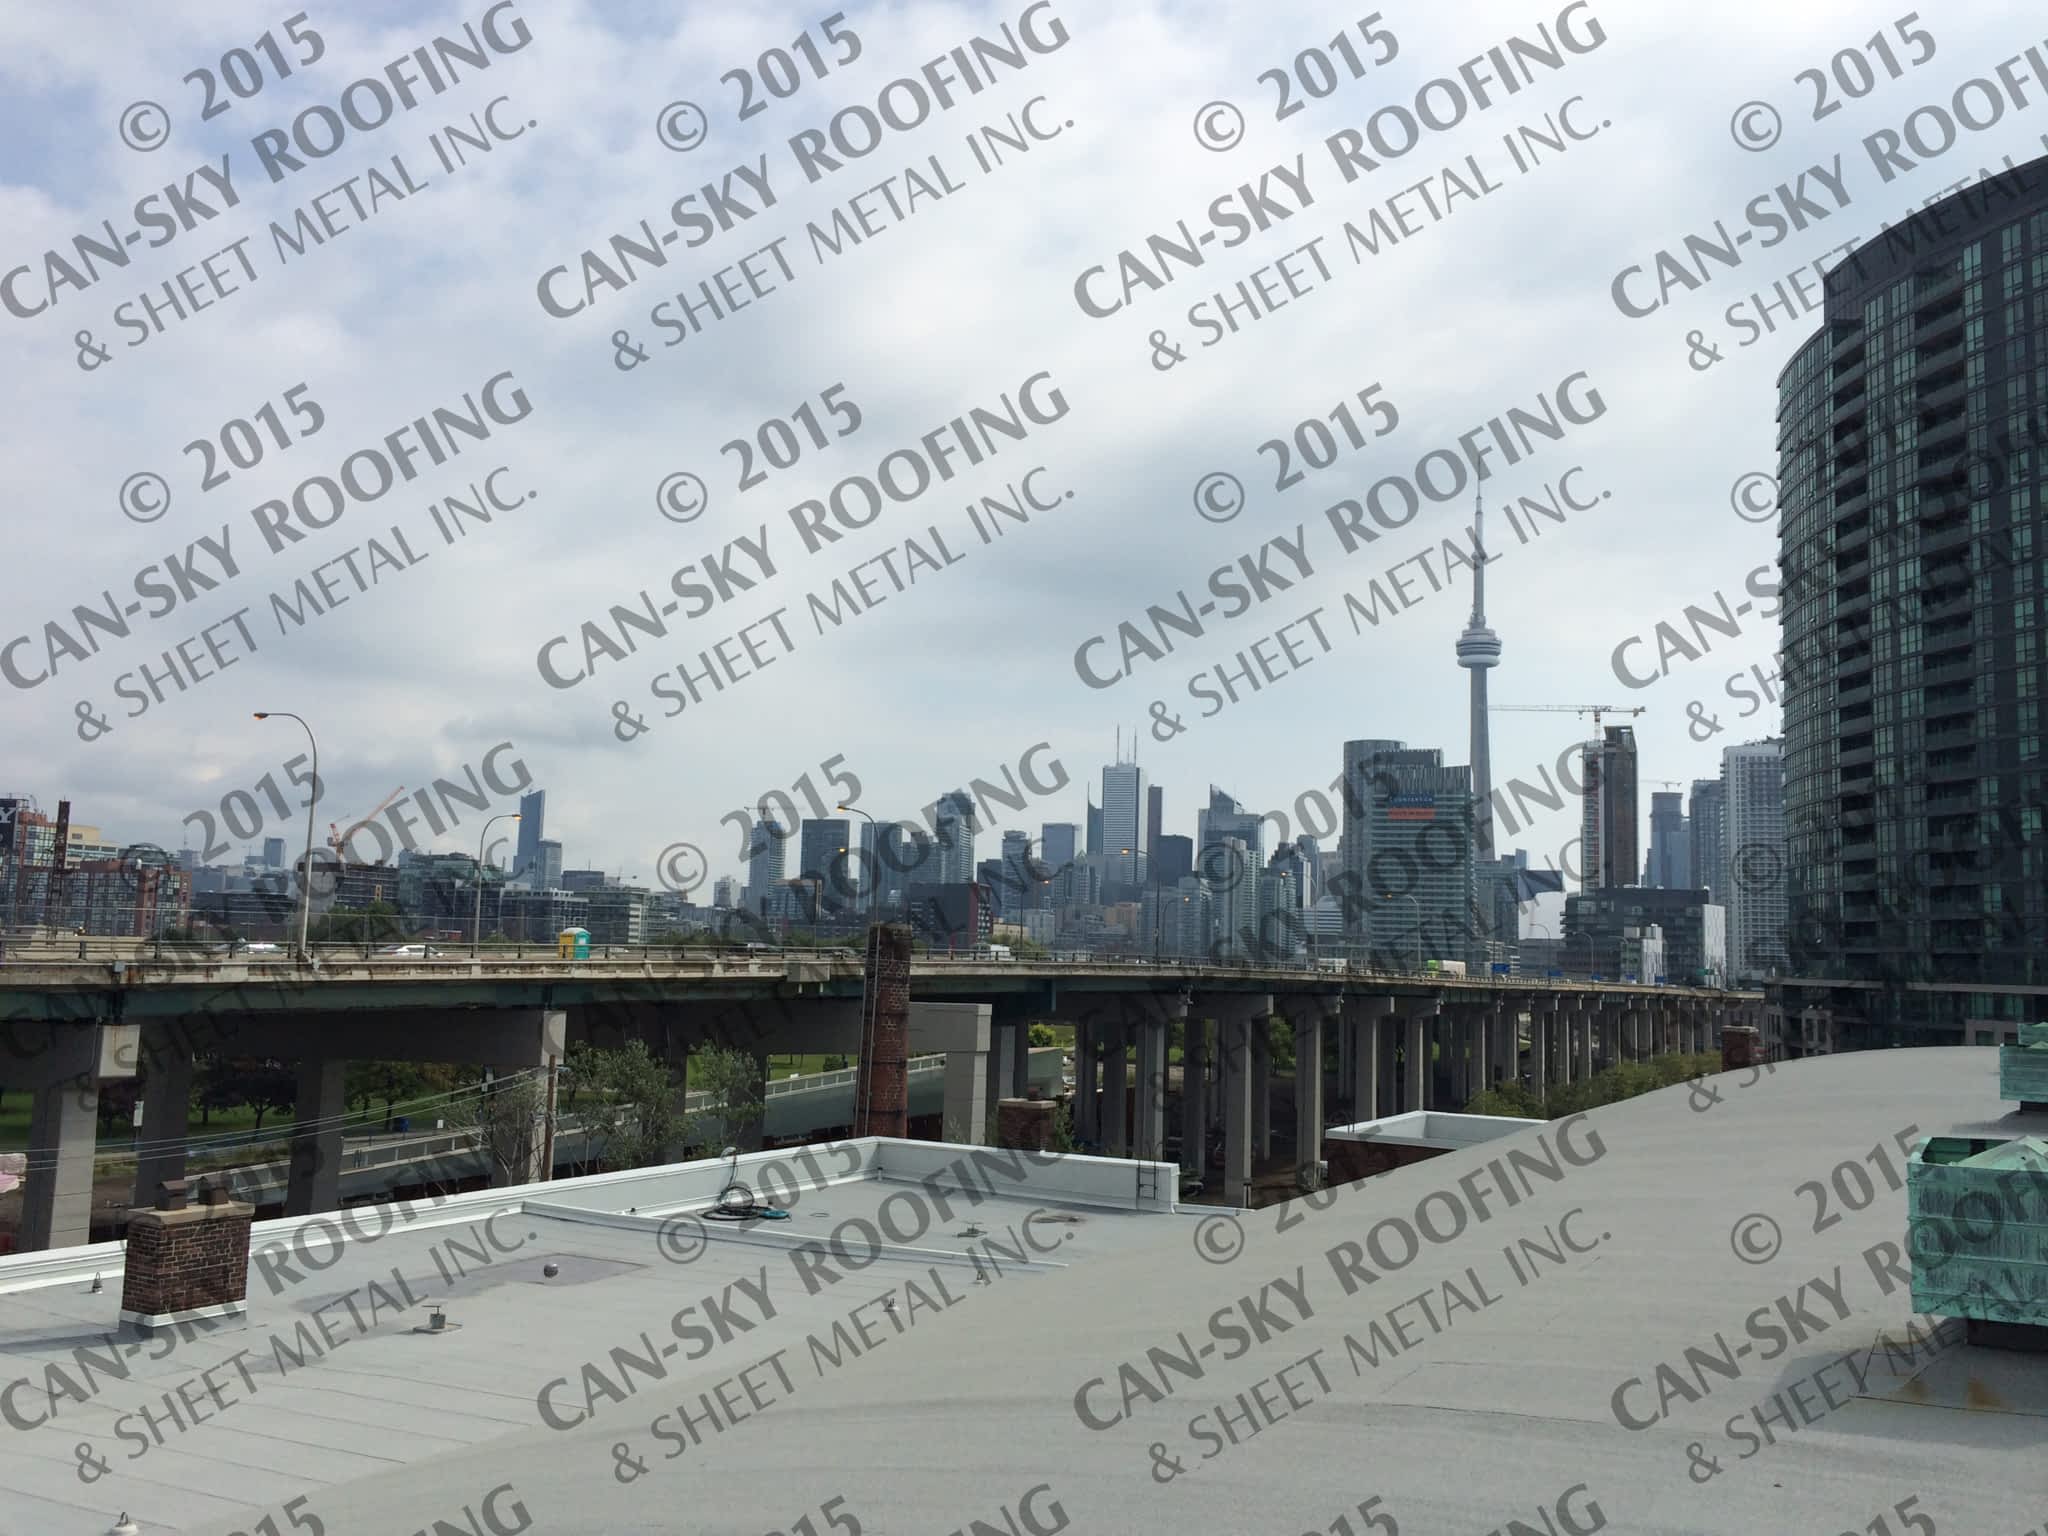 photo Can-Sky Roofing